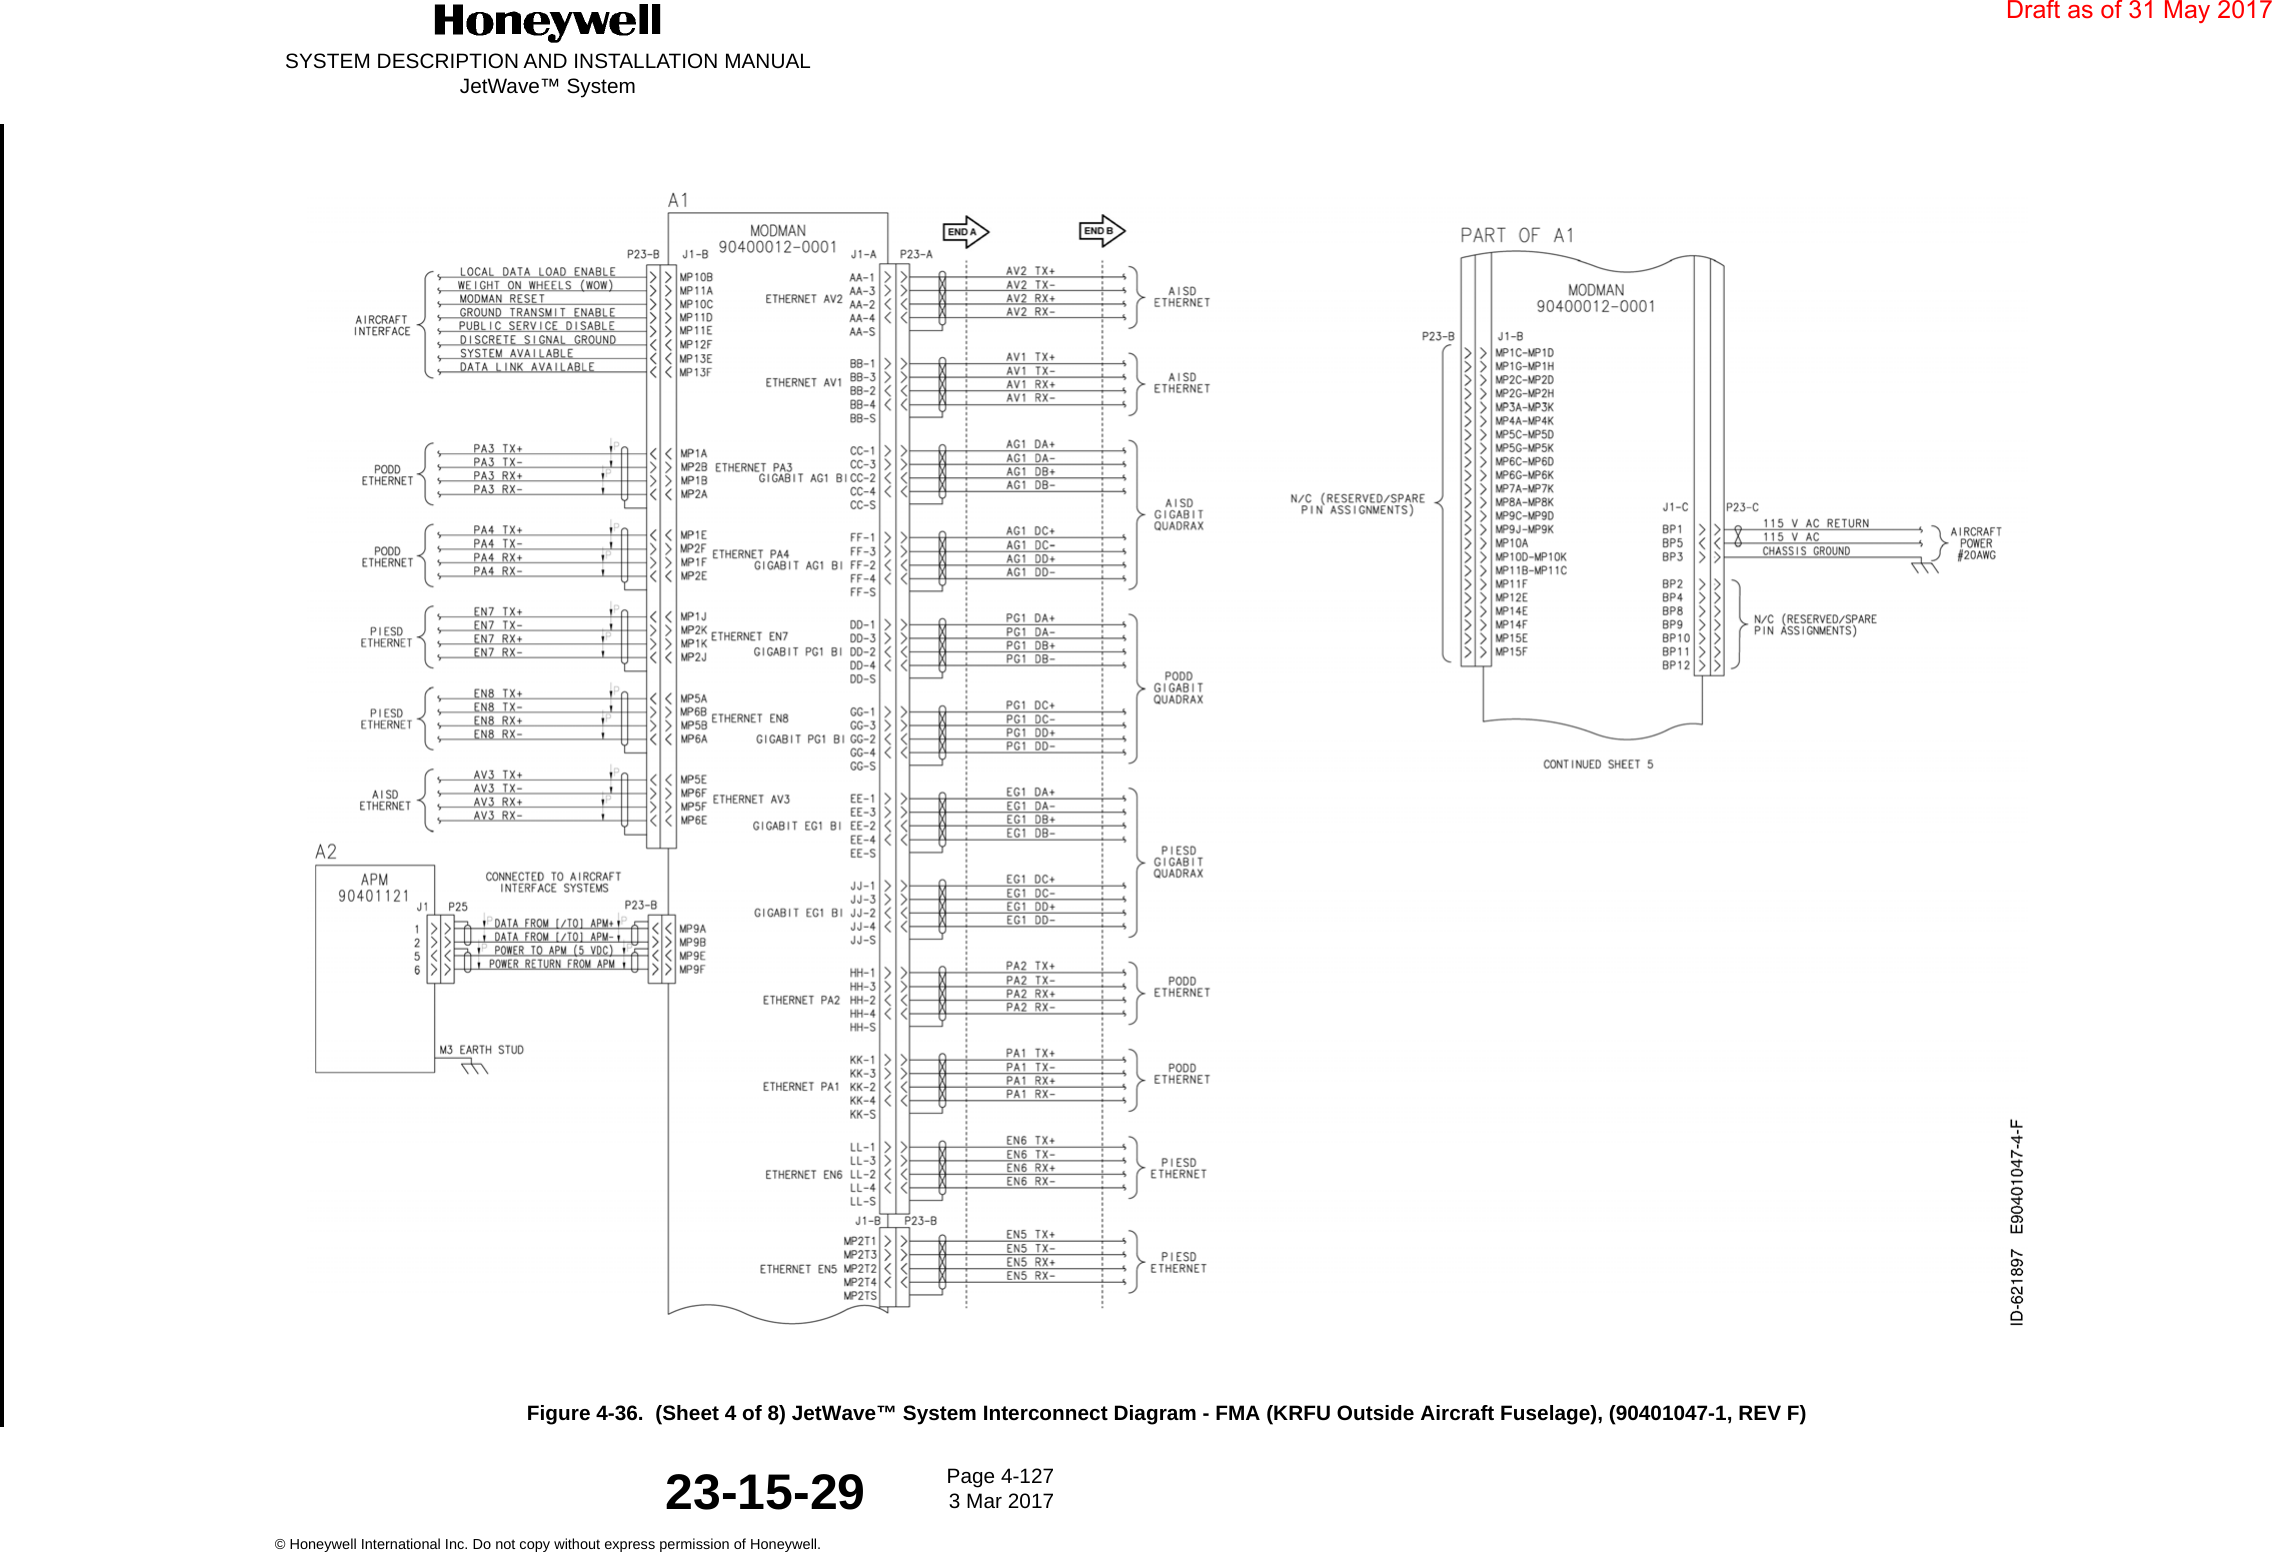 SYSTEM DESCRIPTION AND INSTALLATION MANUALJetWave™ SystemPage 4-127 3 Mar 2017© Honeywell International Inc. Do not copy without express permission of Honeywell.23-15-29Figure 4-36.  (Sheet 4 of 8) JetWave™ System Interconnect Diagram - FMA (KRFU Outside Aircraft Fuselage), (90401047-1, REV F)Draft as of 31 May 2017